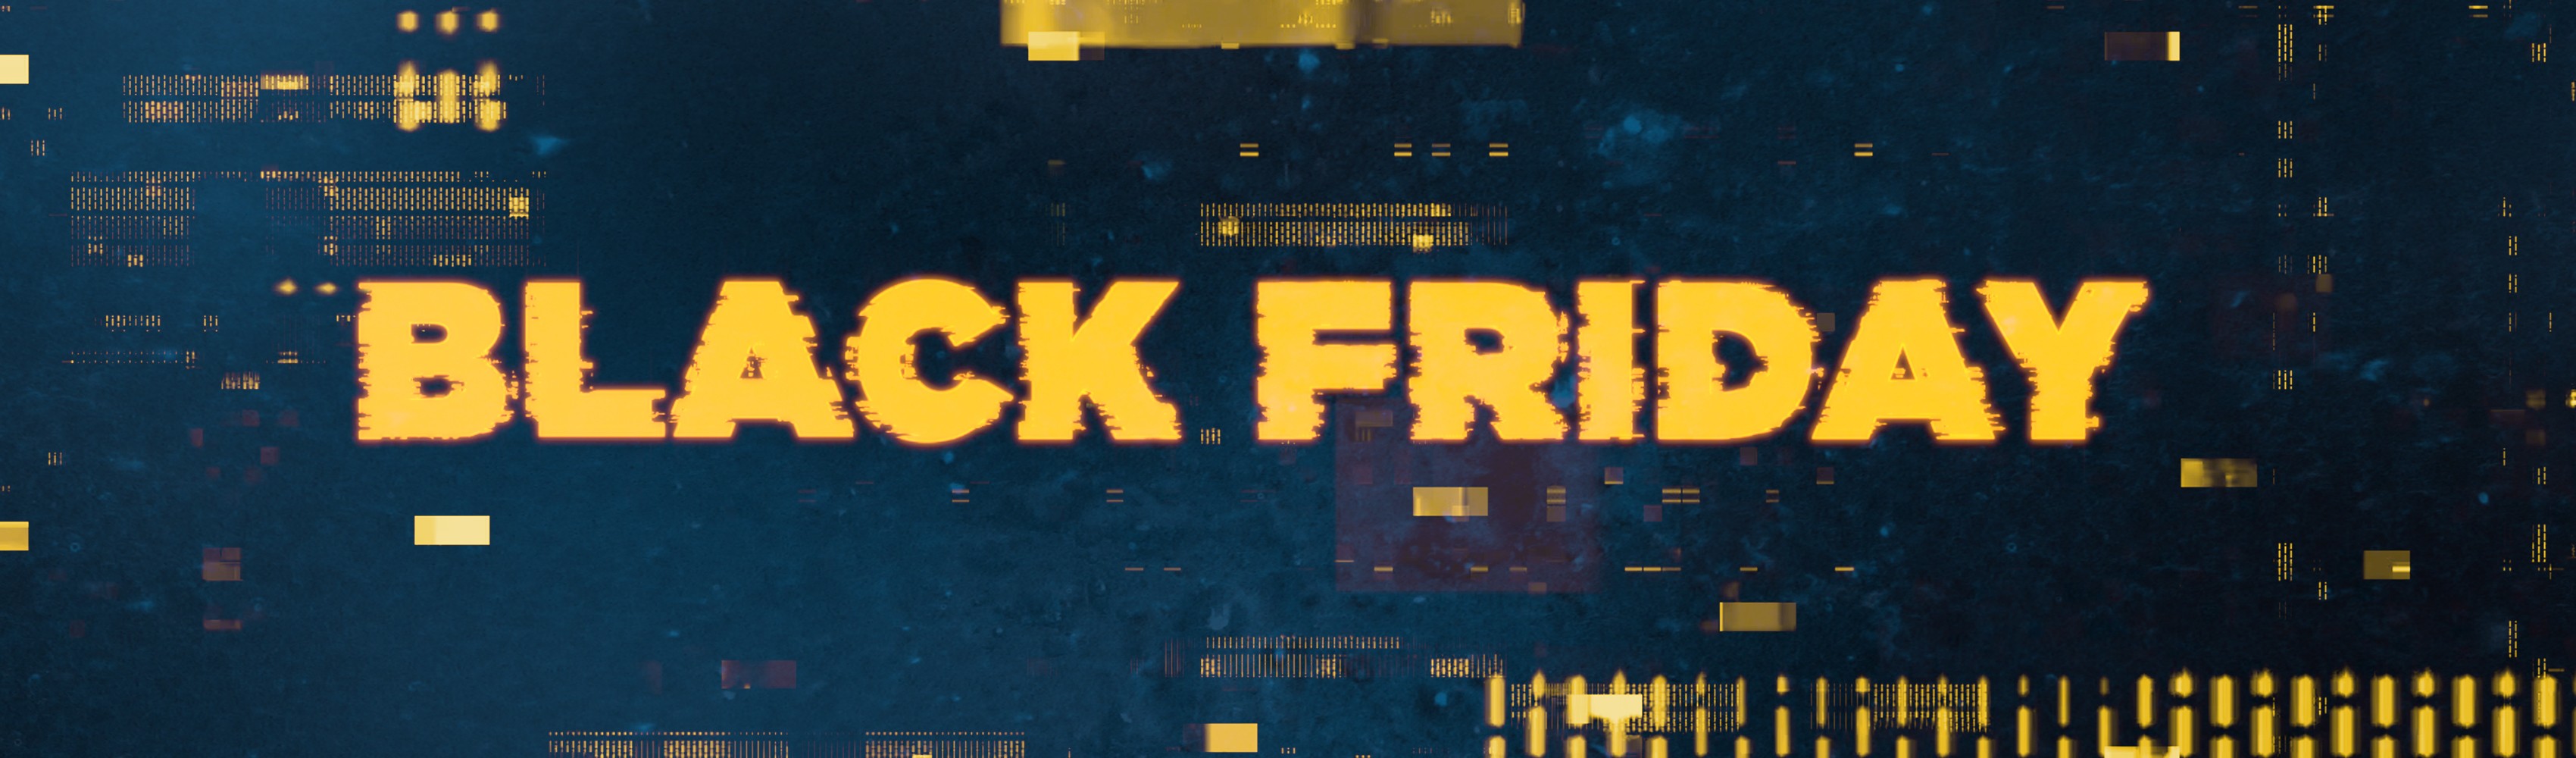 Black Friday 2021 | The best »Black Friday deals« of the year